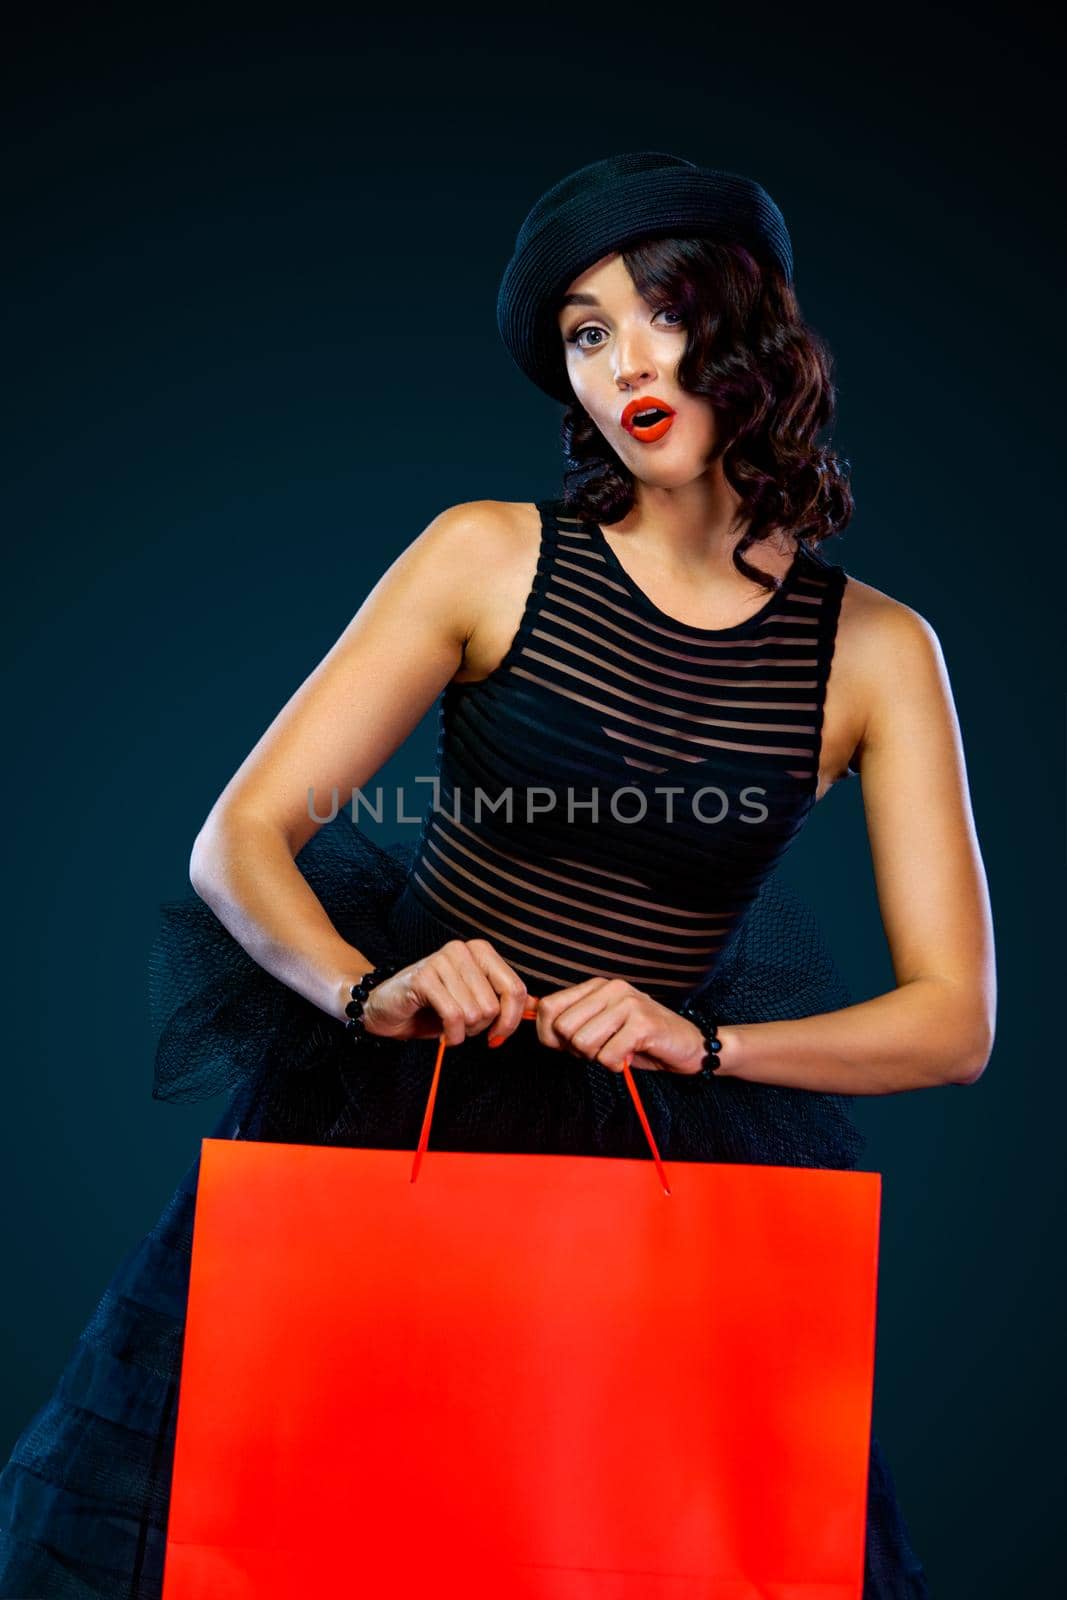 Black friday sale concept for shop. Shopping woman in dress and hat holding red bag isolated on dark background by MikeOrlov